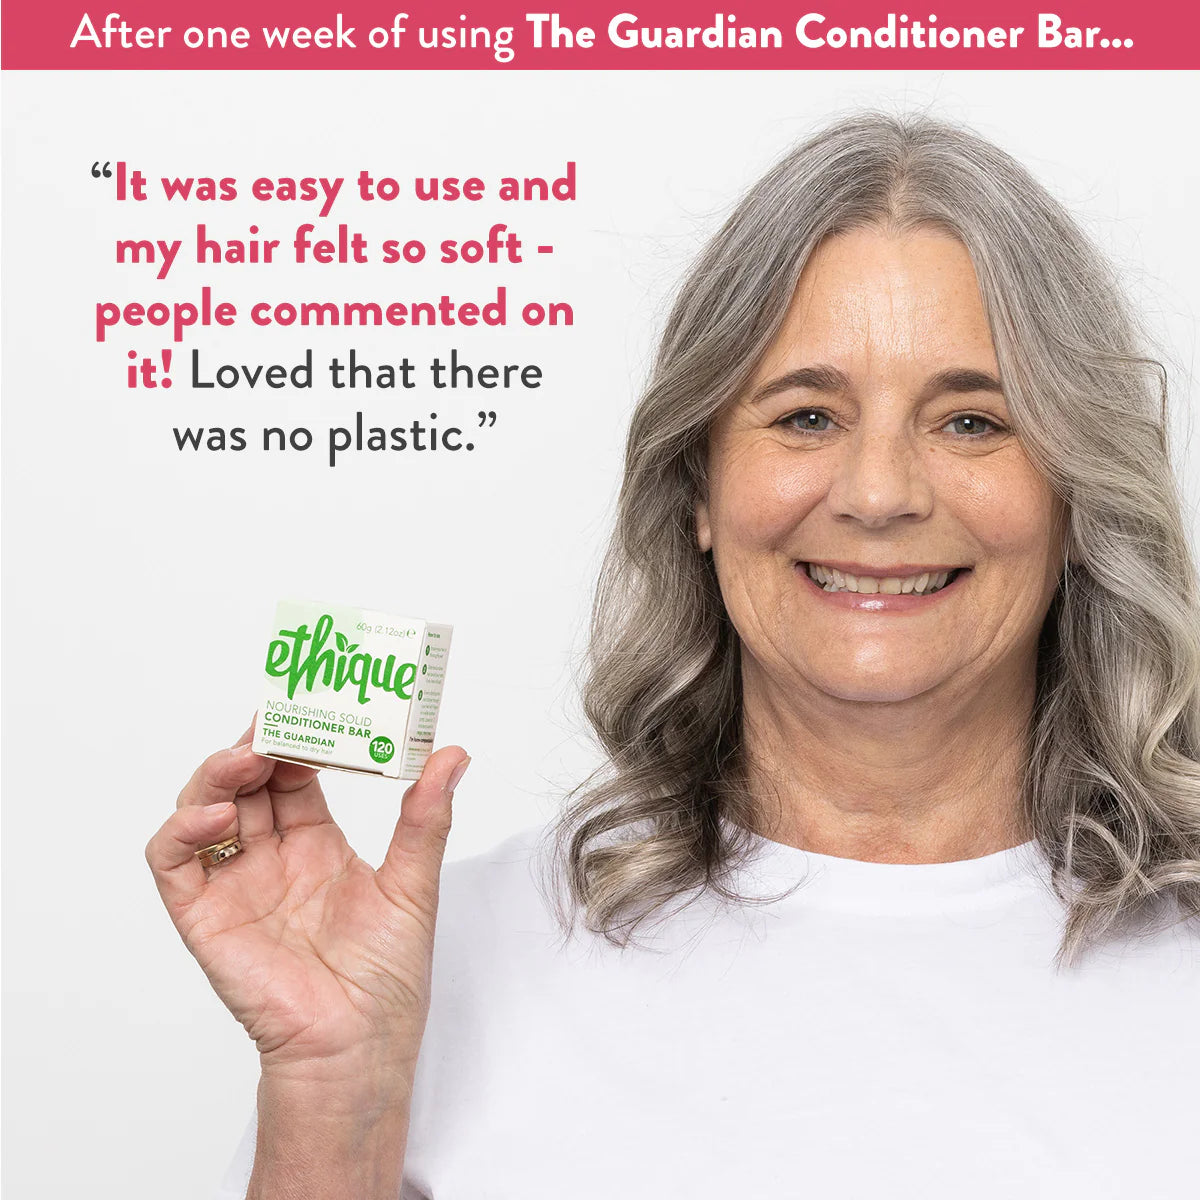 Ethique Nourishing Conditioner Bar for Dry Hair: The Guardian